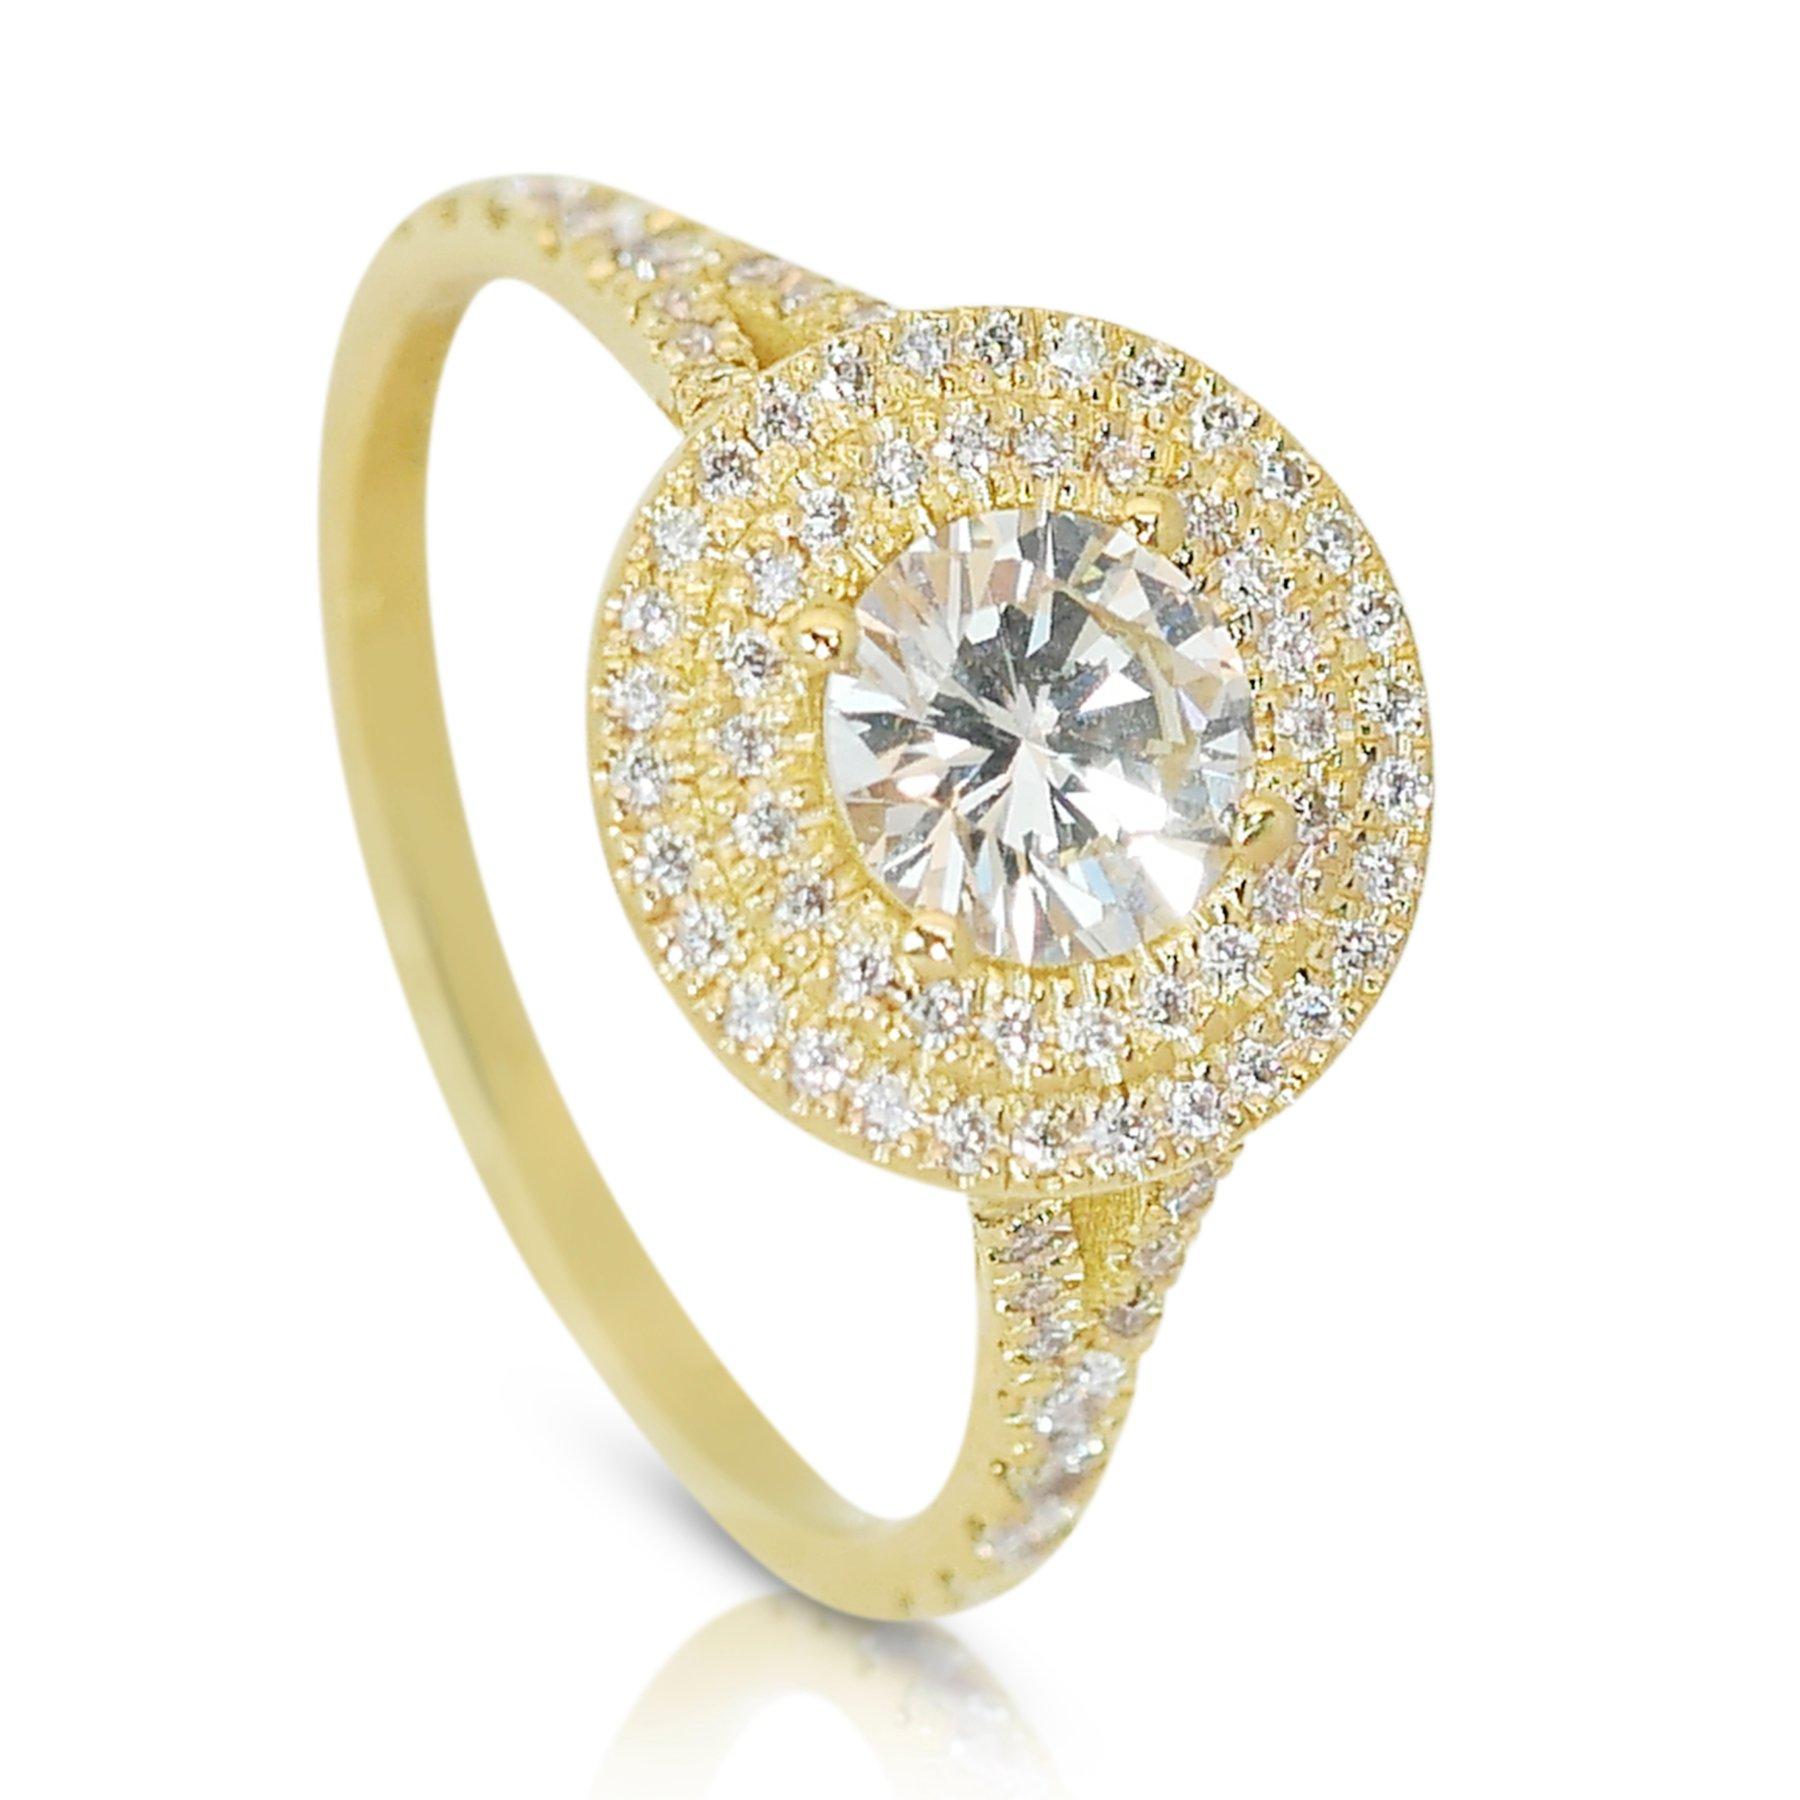 Round Cut Exquisite 1.44ct Diamond Double Halo Ring in 18k Yellow Gold - GIA Certified For Sale